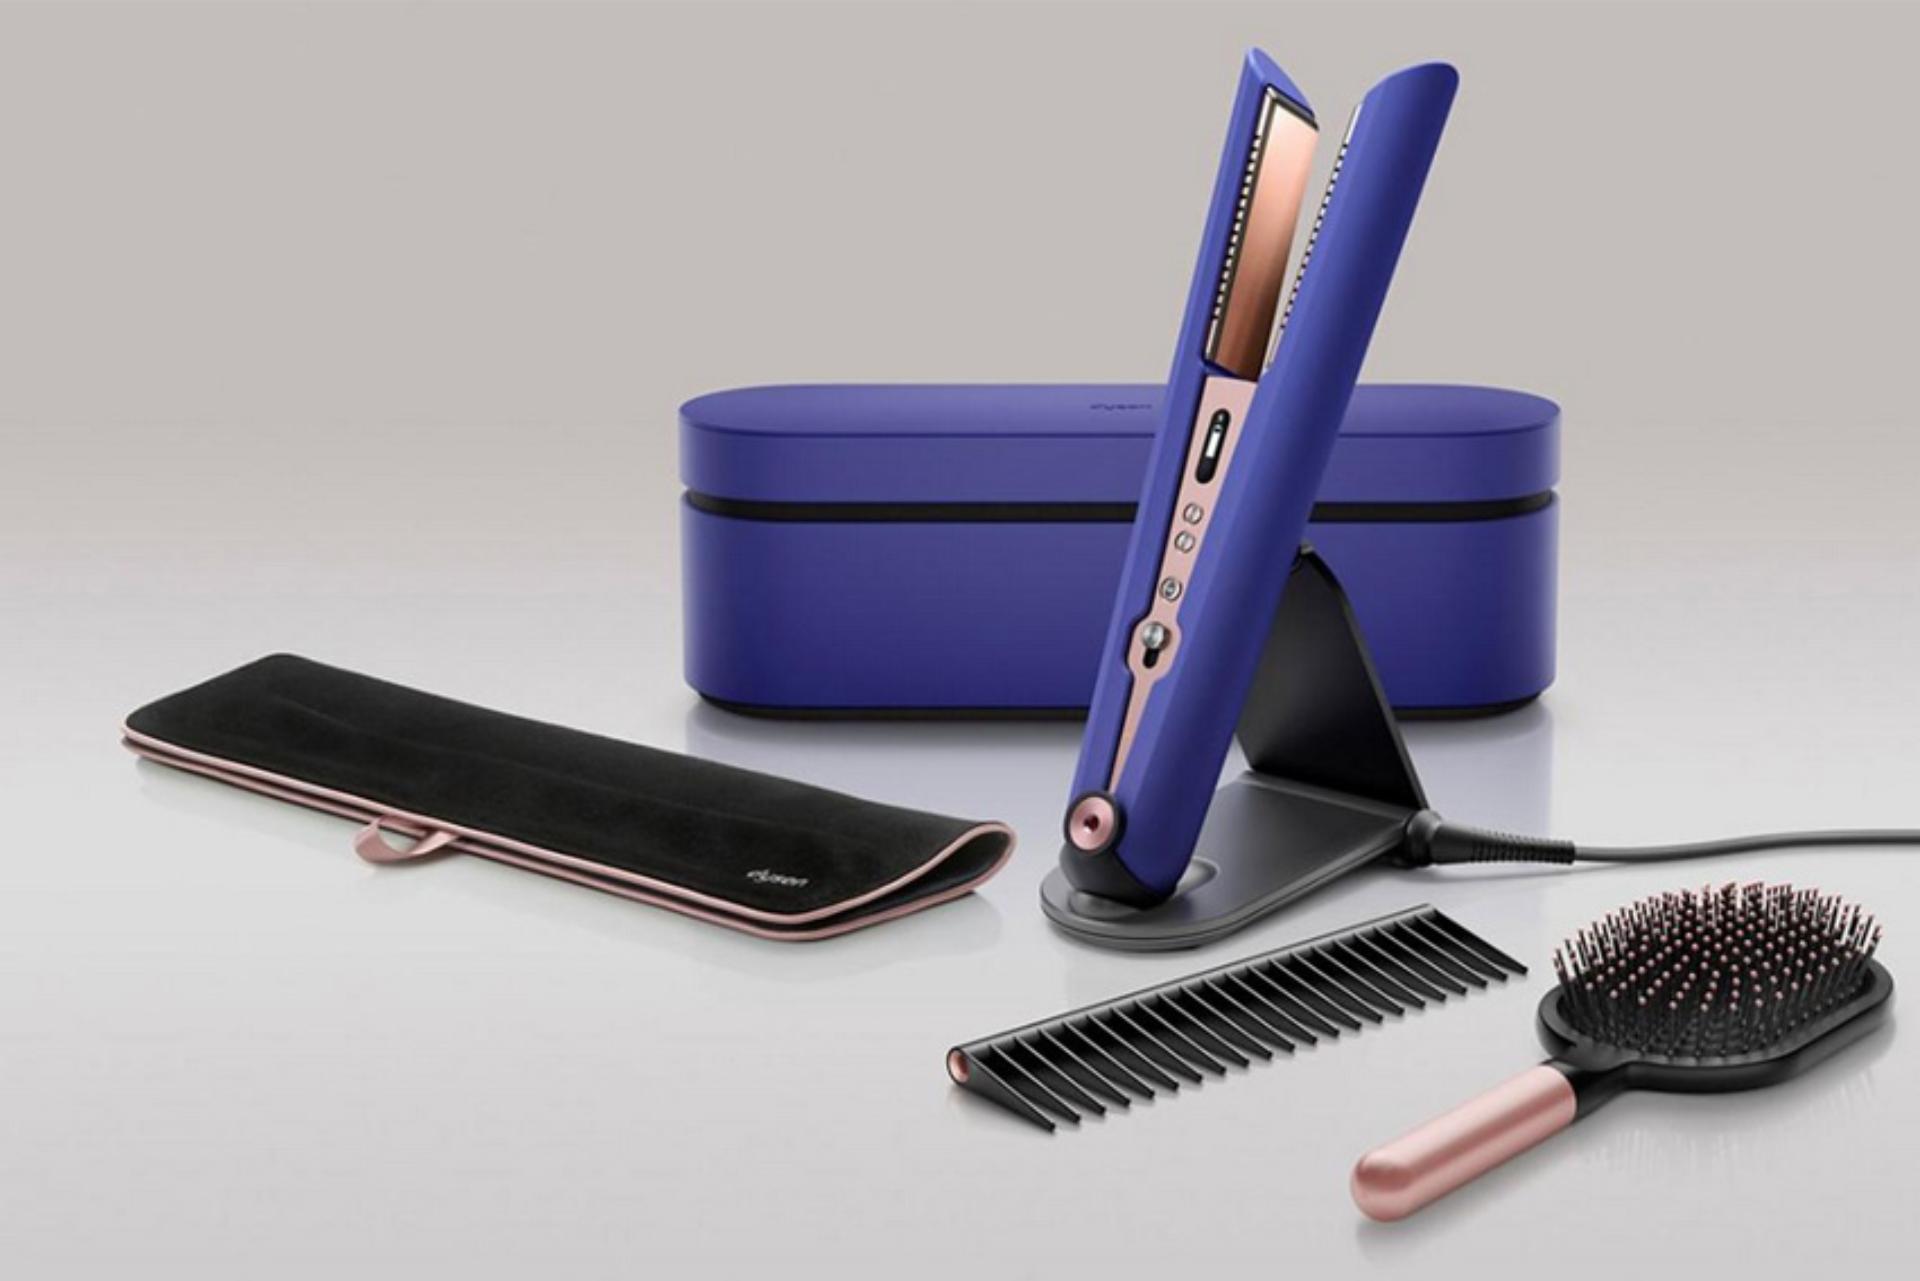 Dyson’s guide to personalised gift ideas